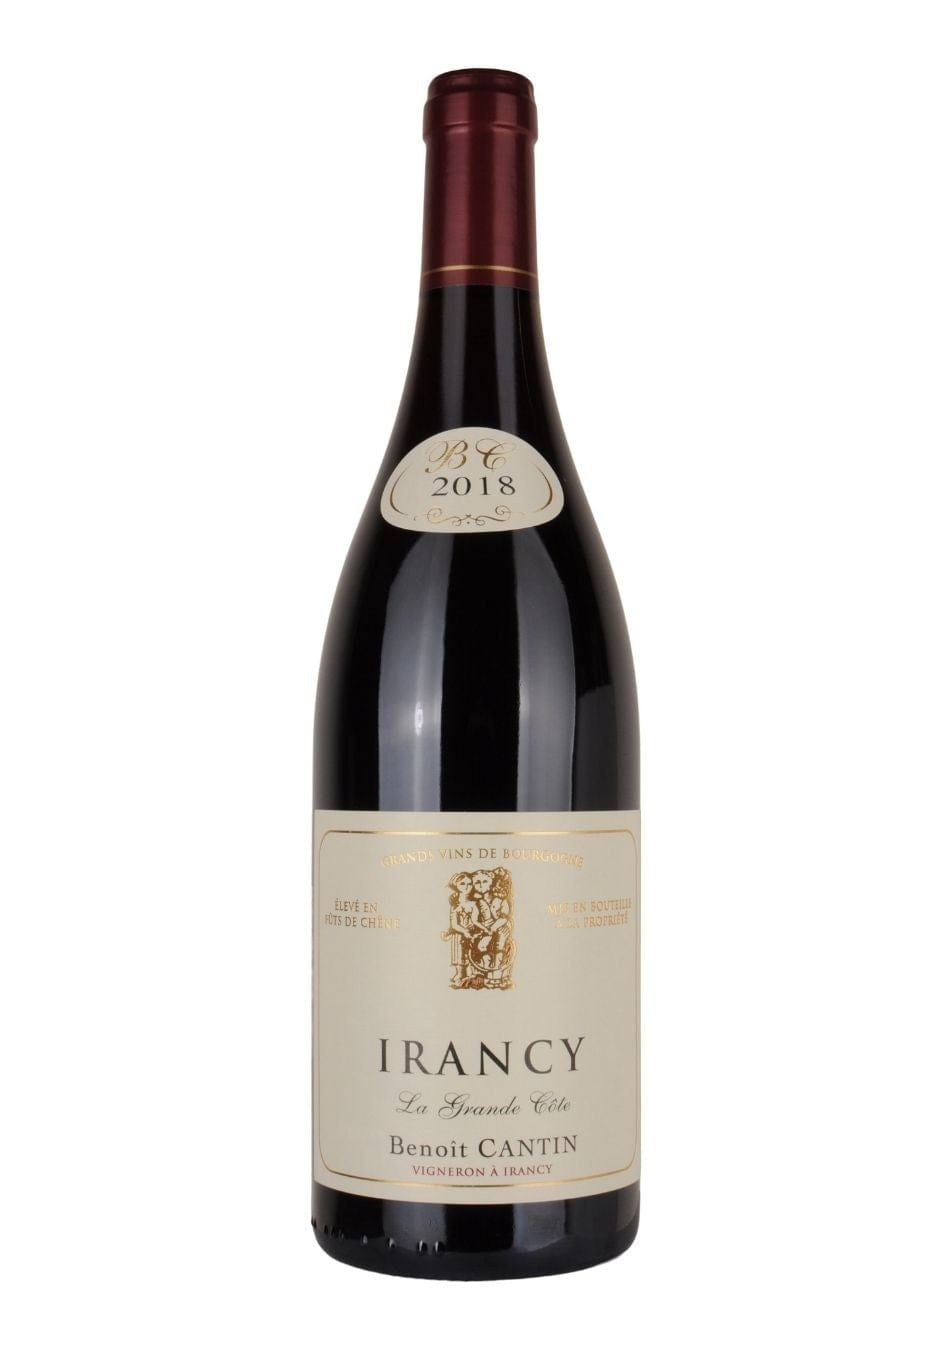 Shop Domaine Benoit Cantin Domaine Benoit Cantin Irancy La Grande Cote 2018 online at PENTICTON artisanal French wine store in Hong Kong. Discover other French wines, promotions, workshops and featured offers at pentictonpacific.com 